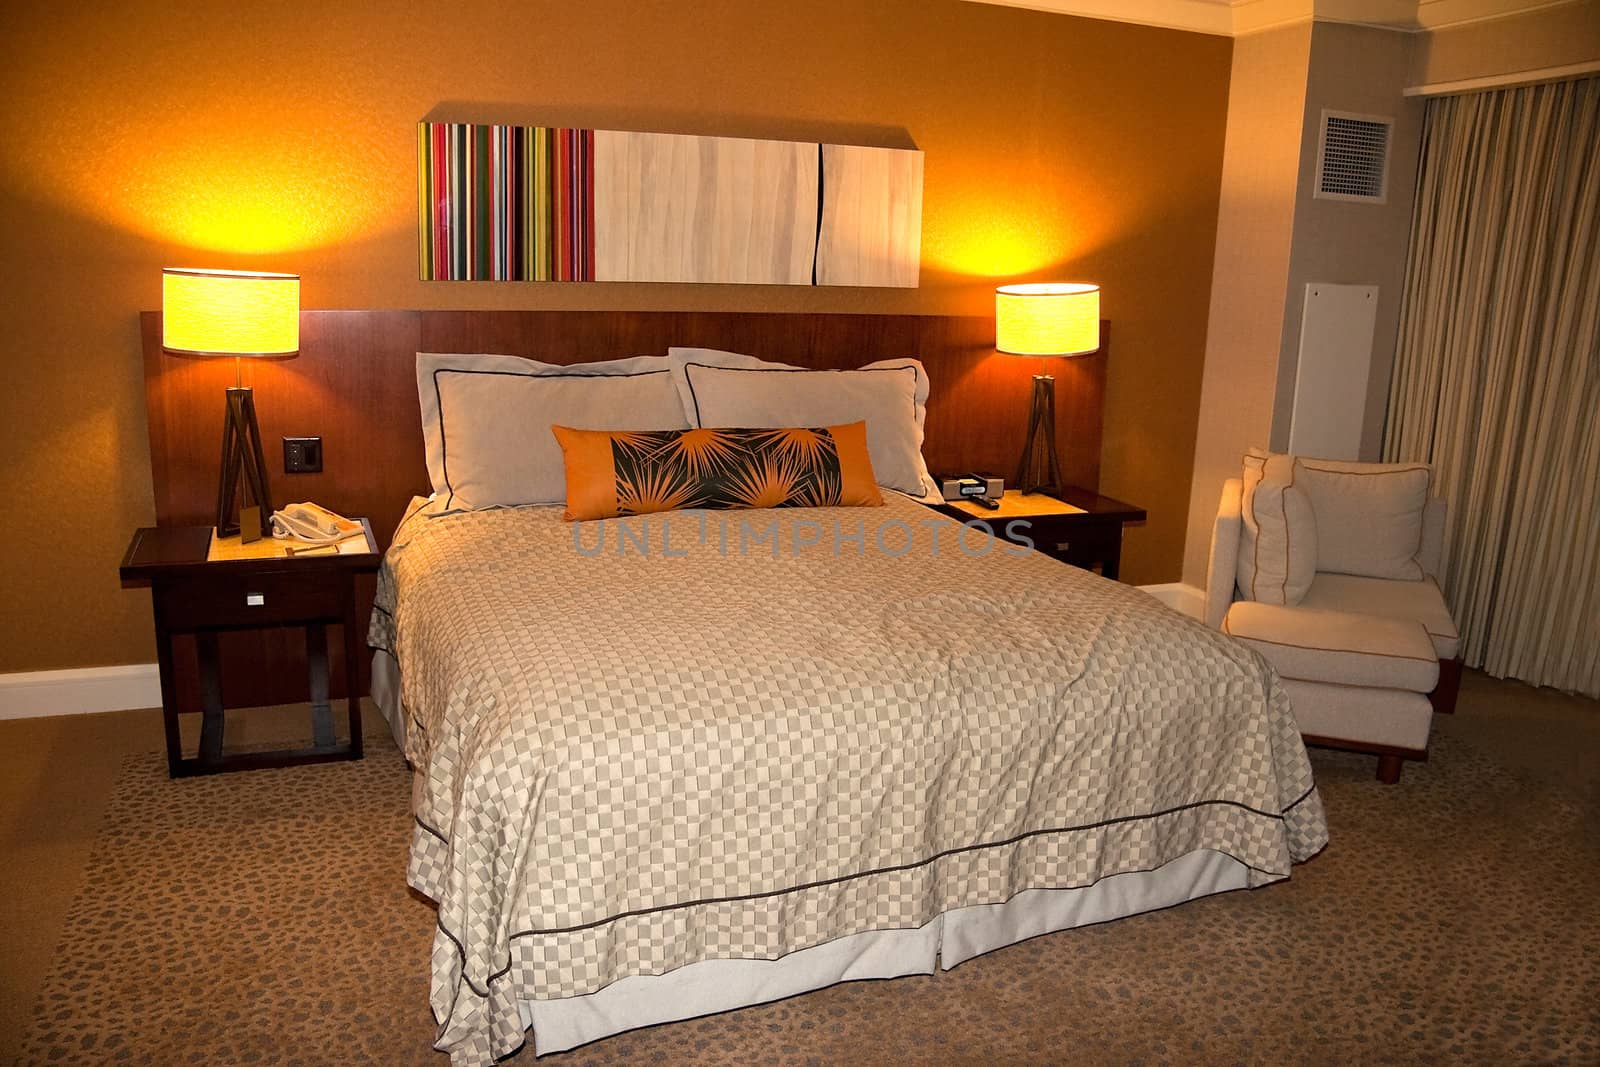 A hotel bedroom with nightstand and lights